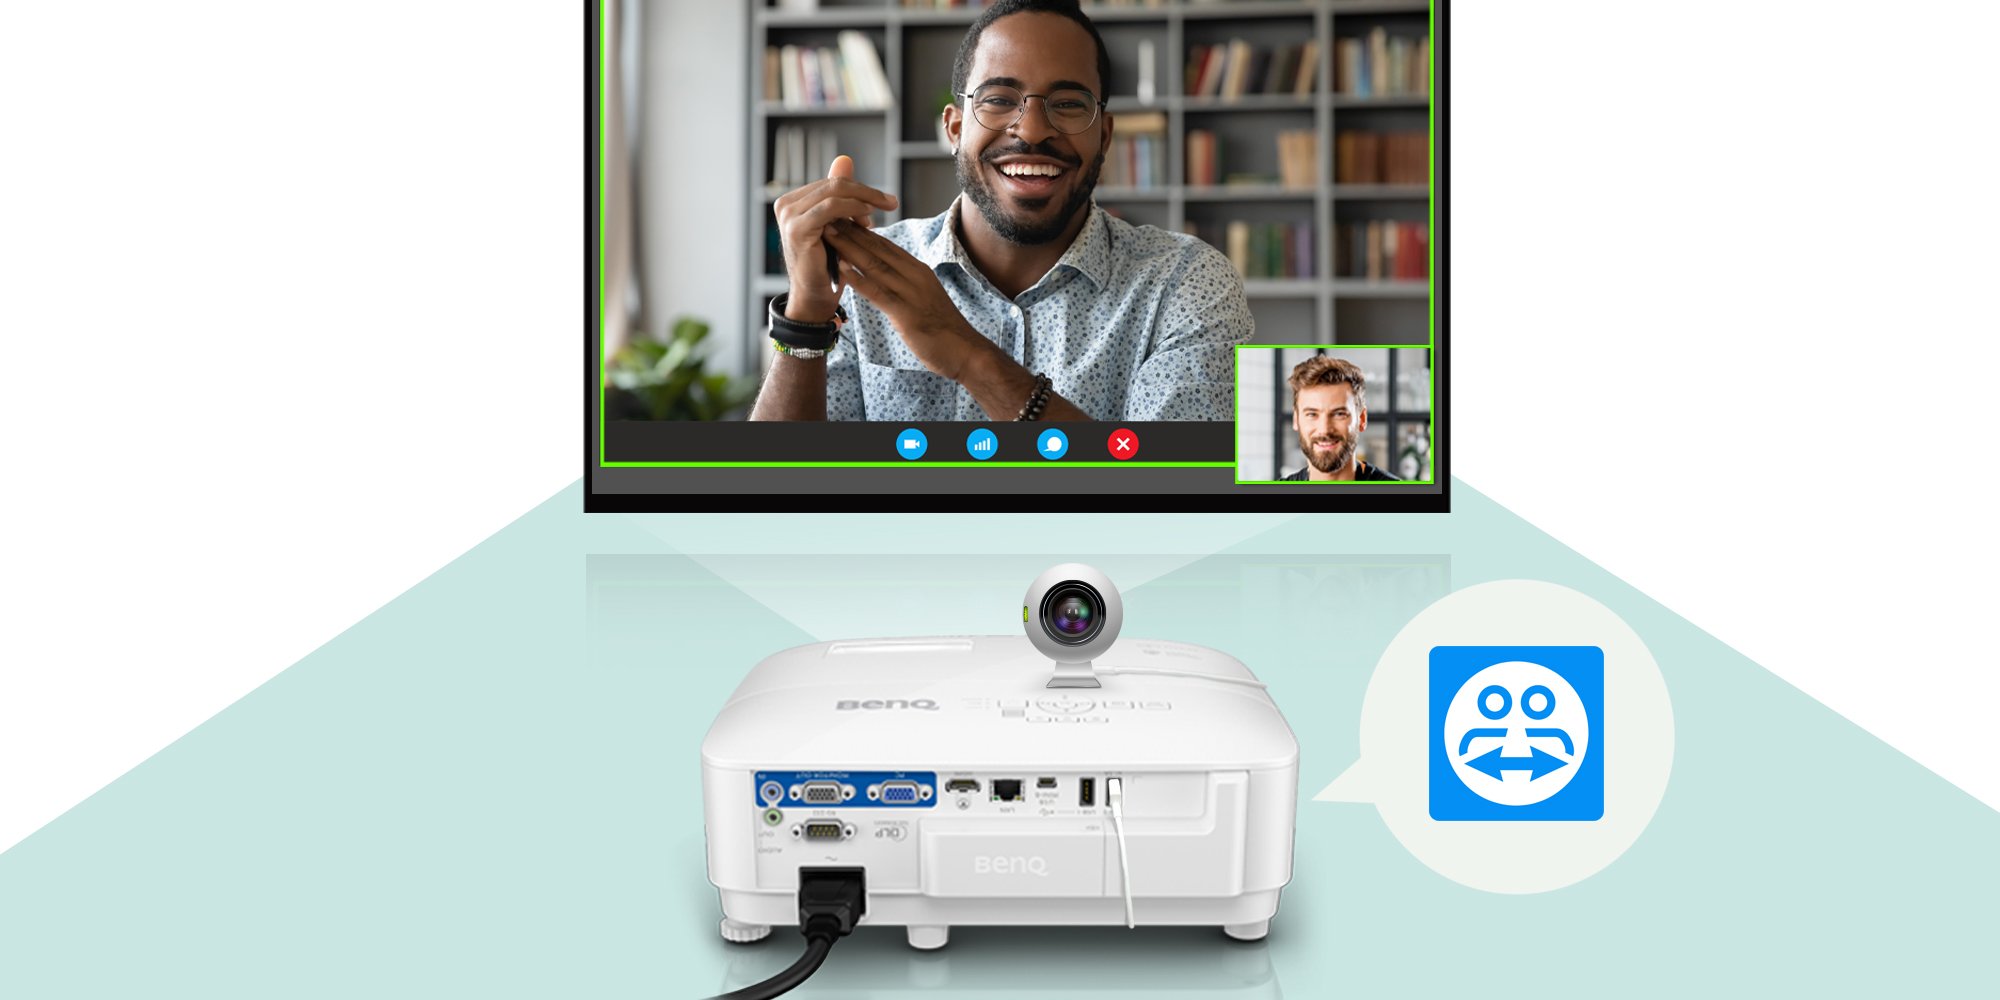 It's easy to start a video conference with BenQ Smart Projector for Business EW800st and DVY21  webcam. 